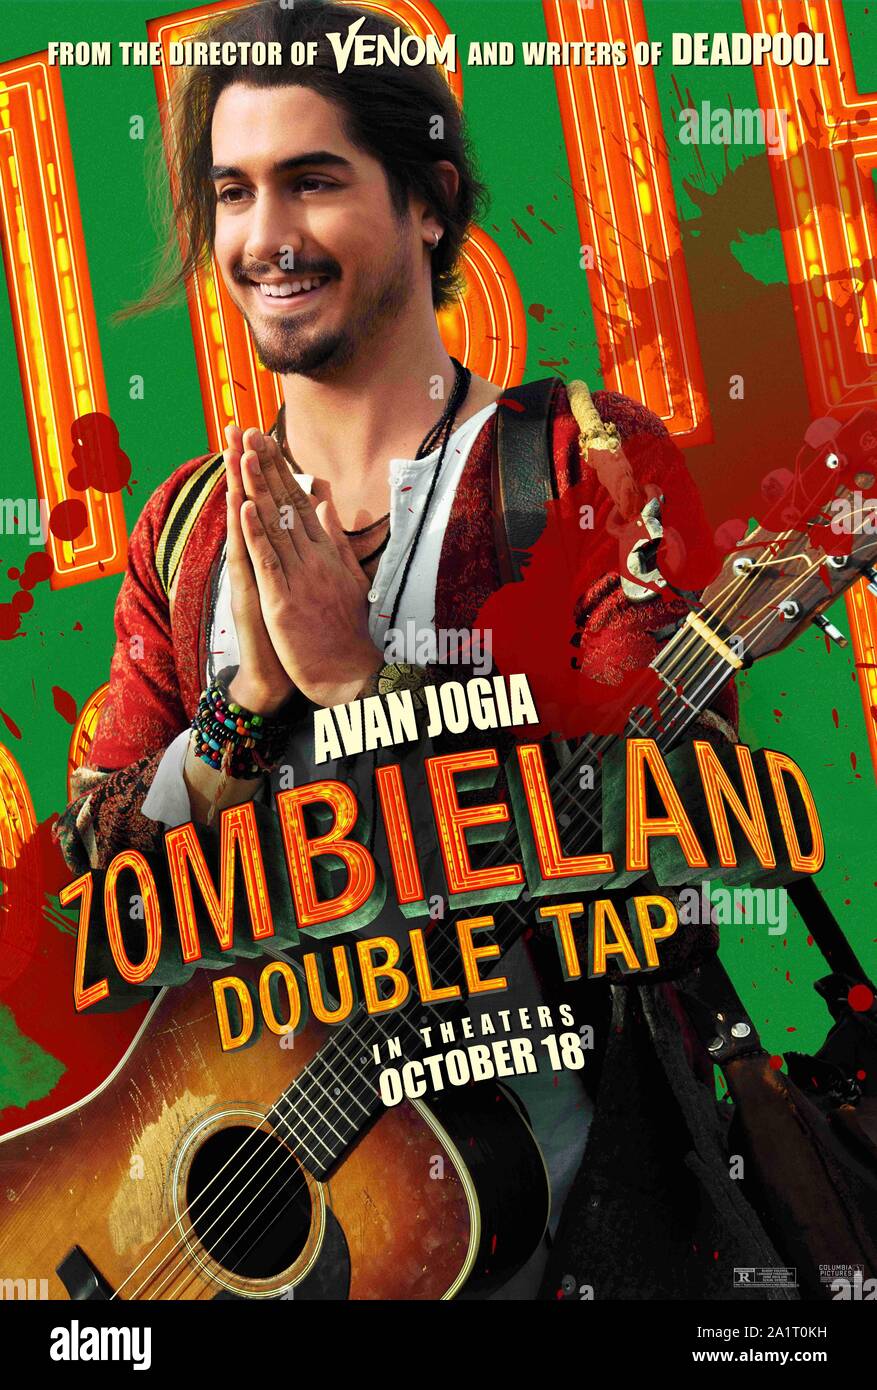 RELEASE DATE: October 18, 2019 TITLE: Zombieland 2: Double Tap STUDIO: Colombia Pictures DIRECTOR: Ruben Fleischer PLOT: Columbus, Tallahasse, Wichita, and Little Rock move to the American heartland as they face off against evolved zombies, fellow survivors, and the growing pains of the snarky makeshift family. STARRING: AVA JOGIA as Berkeley. (Credit Image: © Colombia Pictures/Entertainment Pictures) Stock Photo